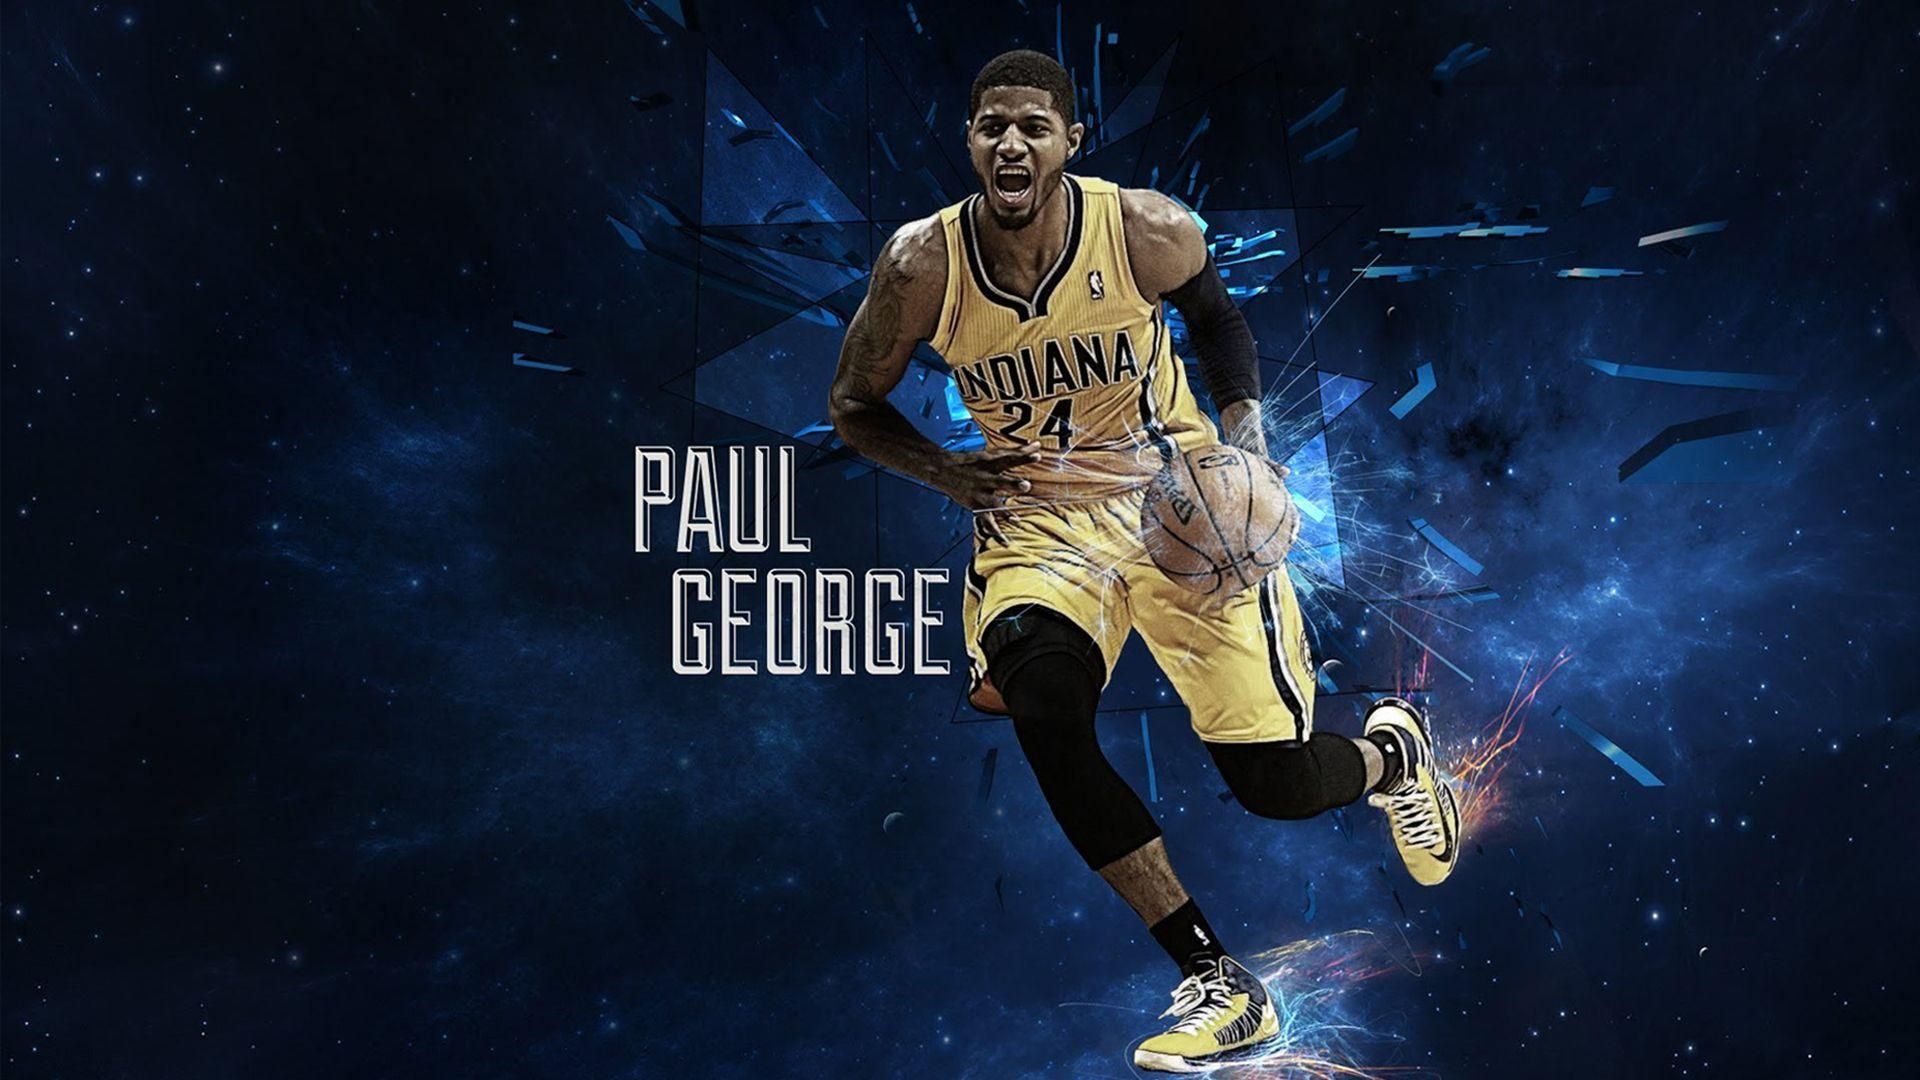 Basketball players wallpaper. Basketball players, Paul george, Lebron james cleveland cavaliers